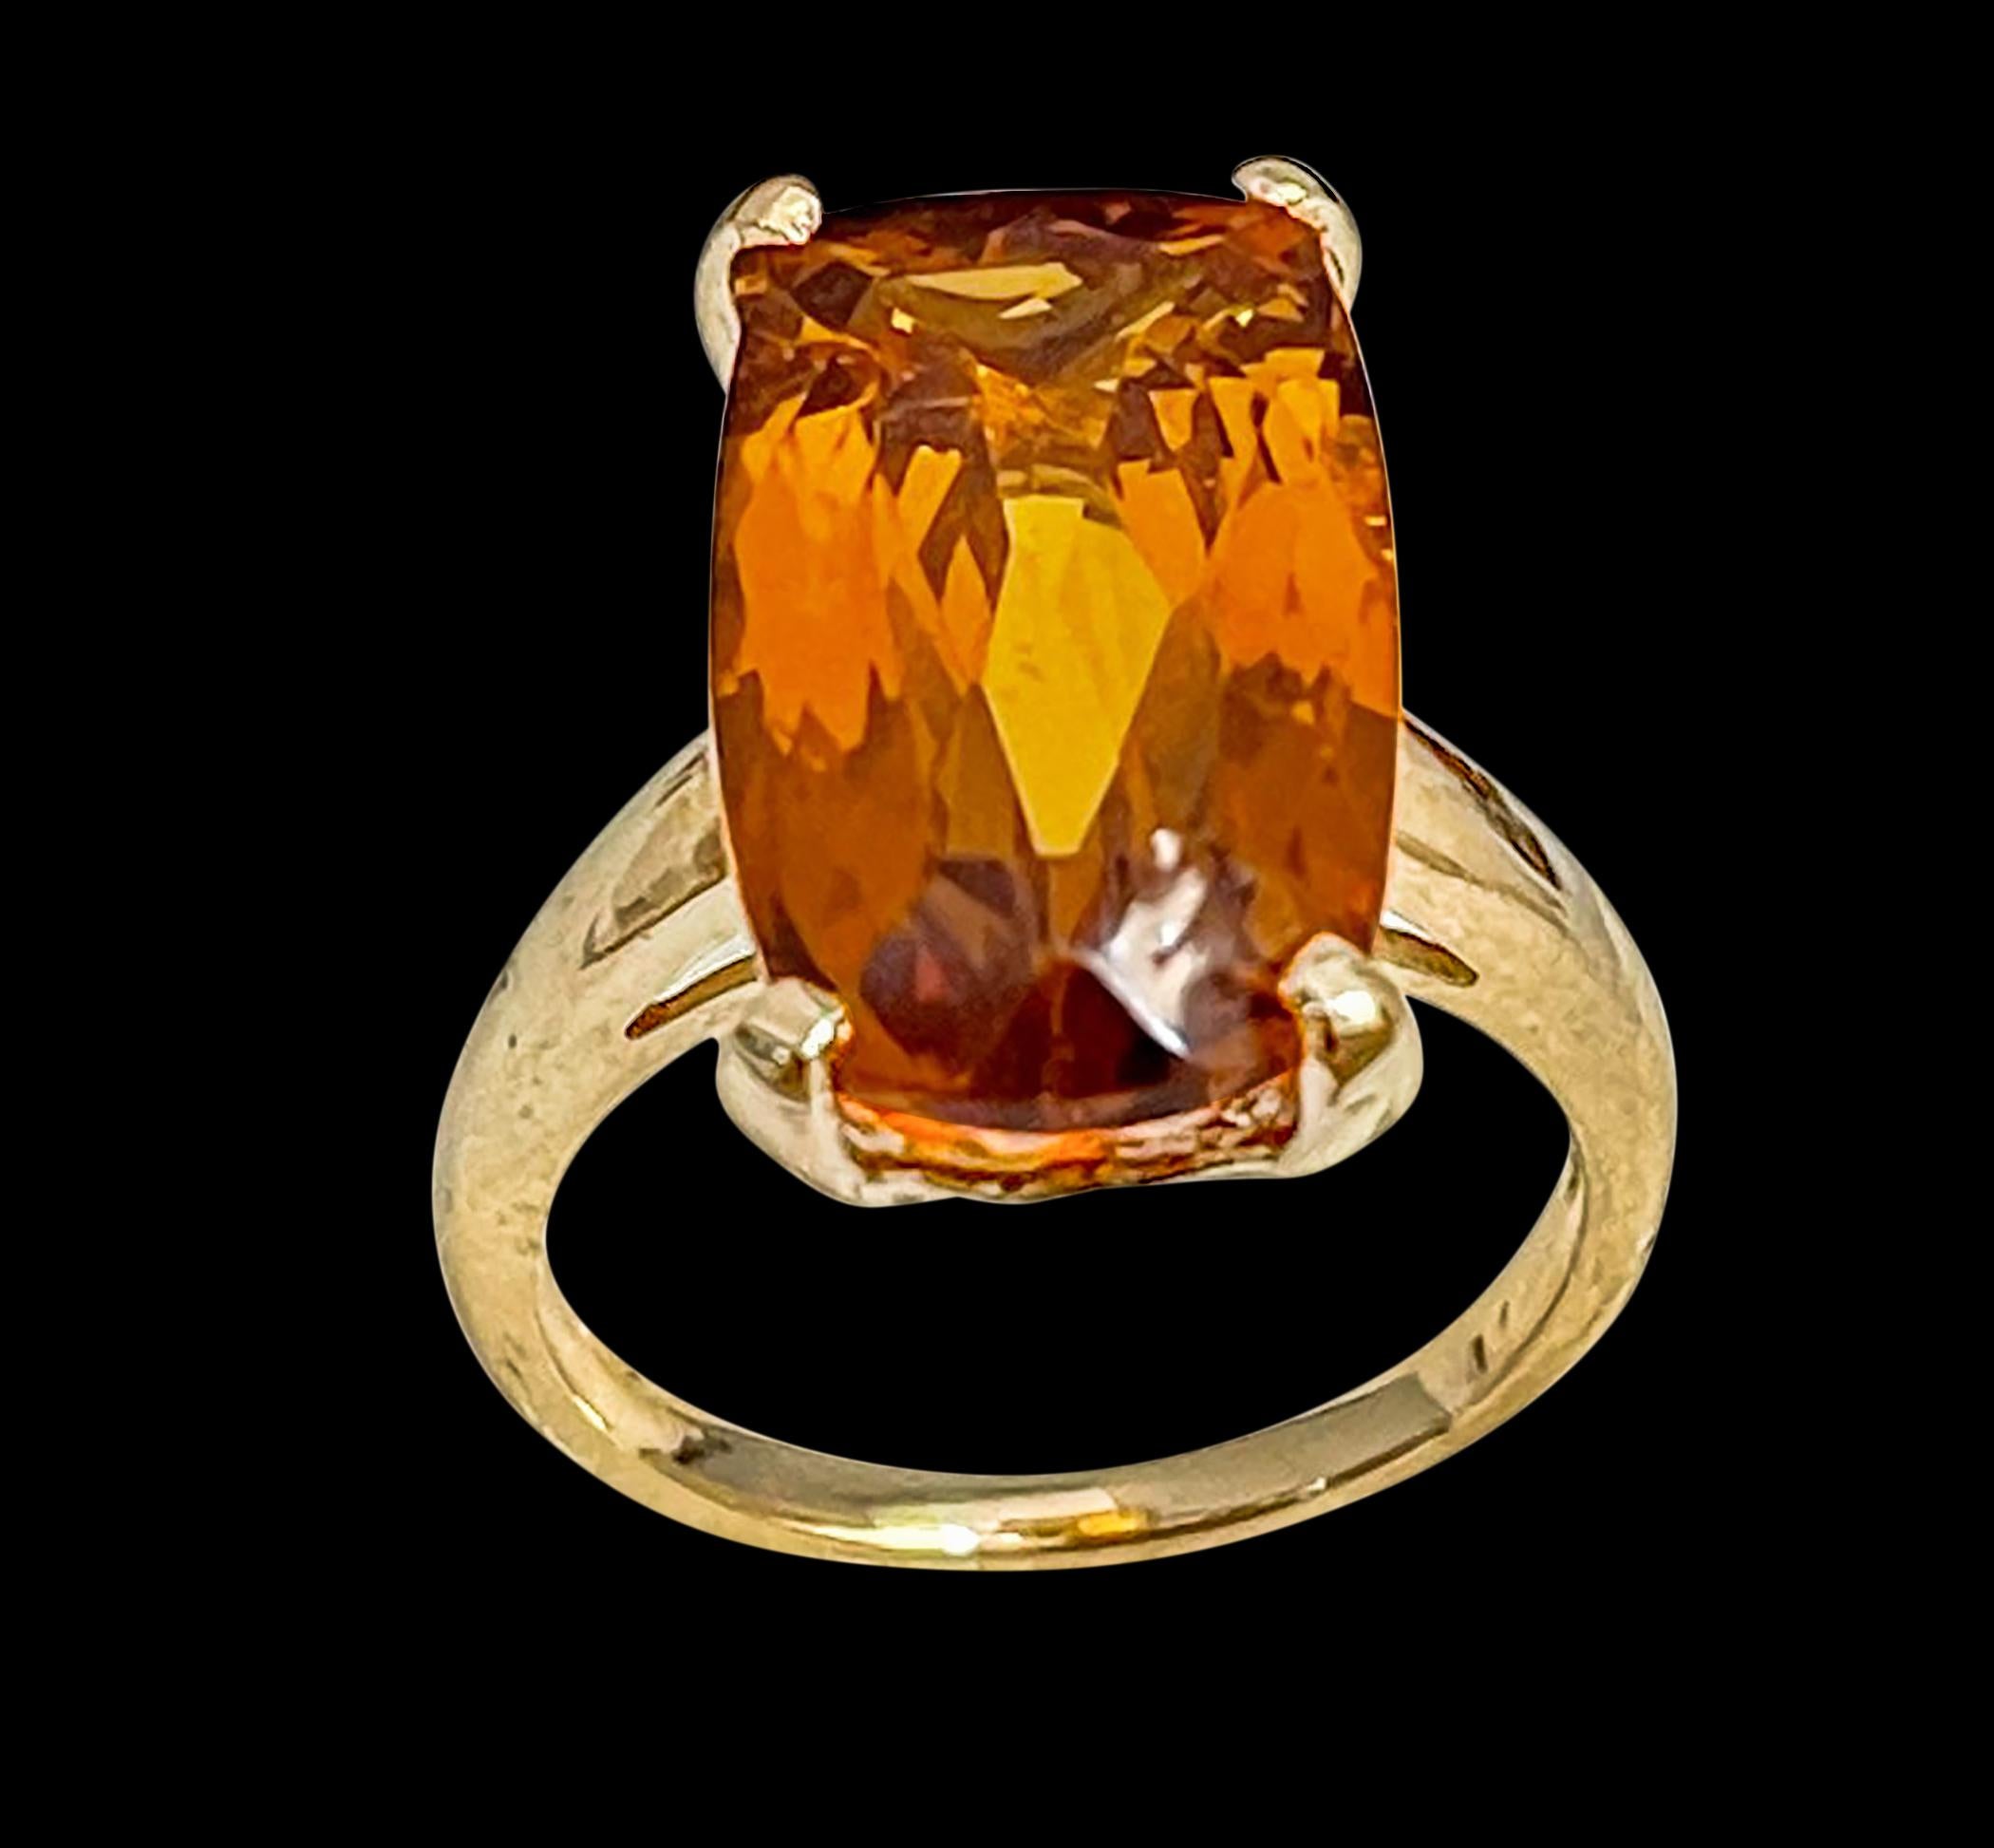 Approximately 6 Carat Natural  Very long Cushion shape  Citrine Cocktail  Ring in 14 Karat Yellow Gold, Estate , Size 5.2

This is a ring which has a  approximately  6 carat of high quality Citrine stone. The stone is 10X17 MM 
Color and clarity is